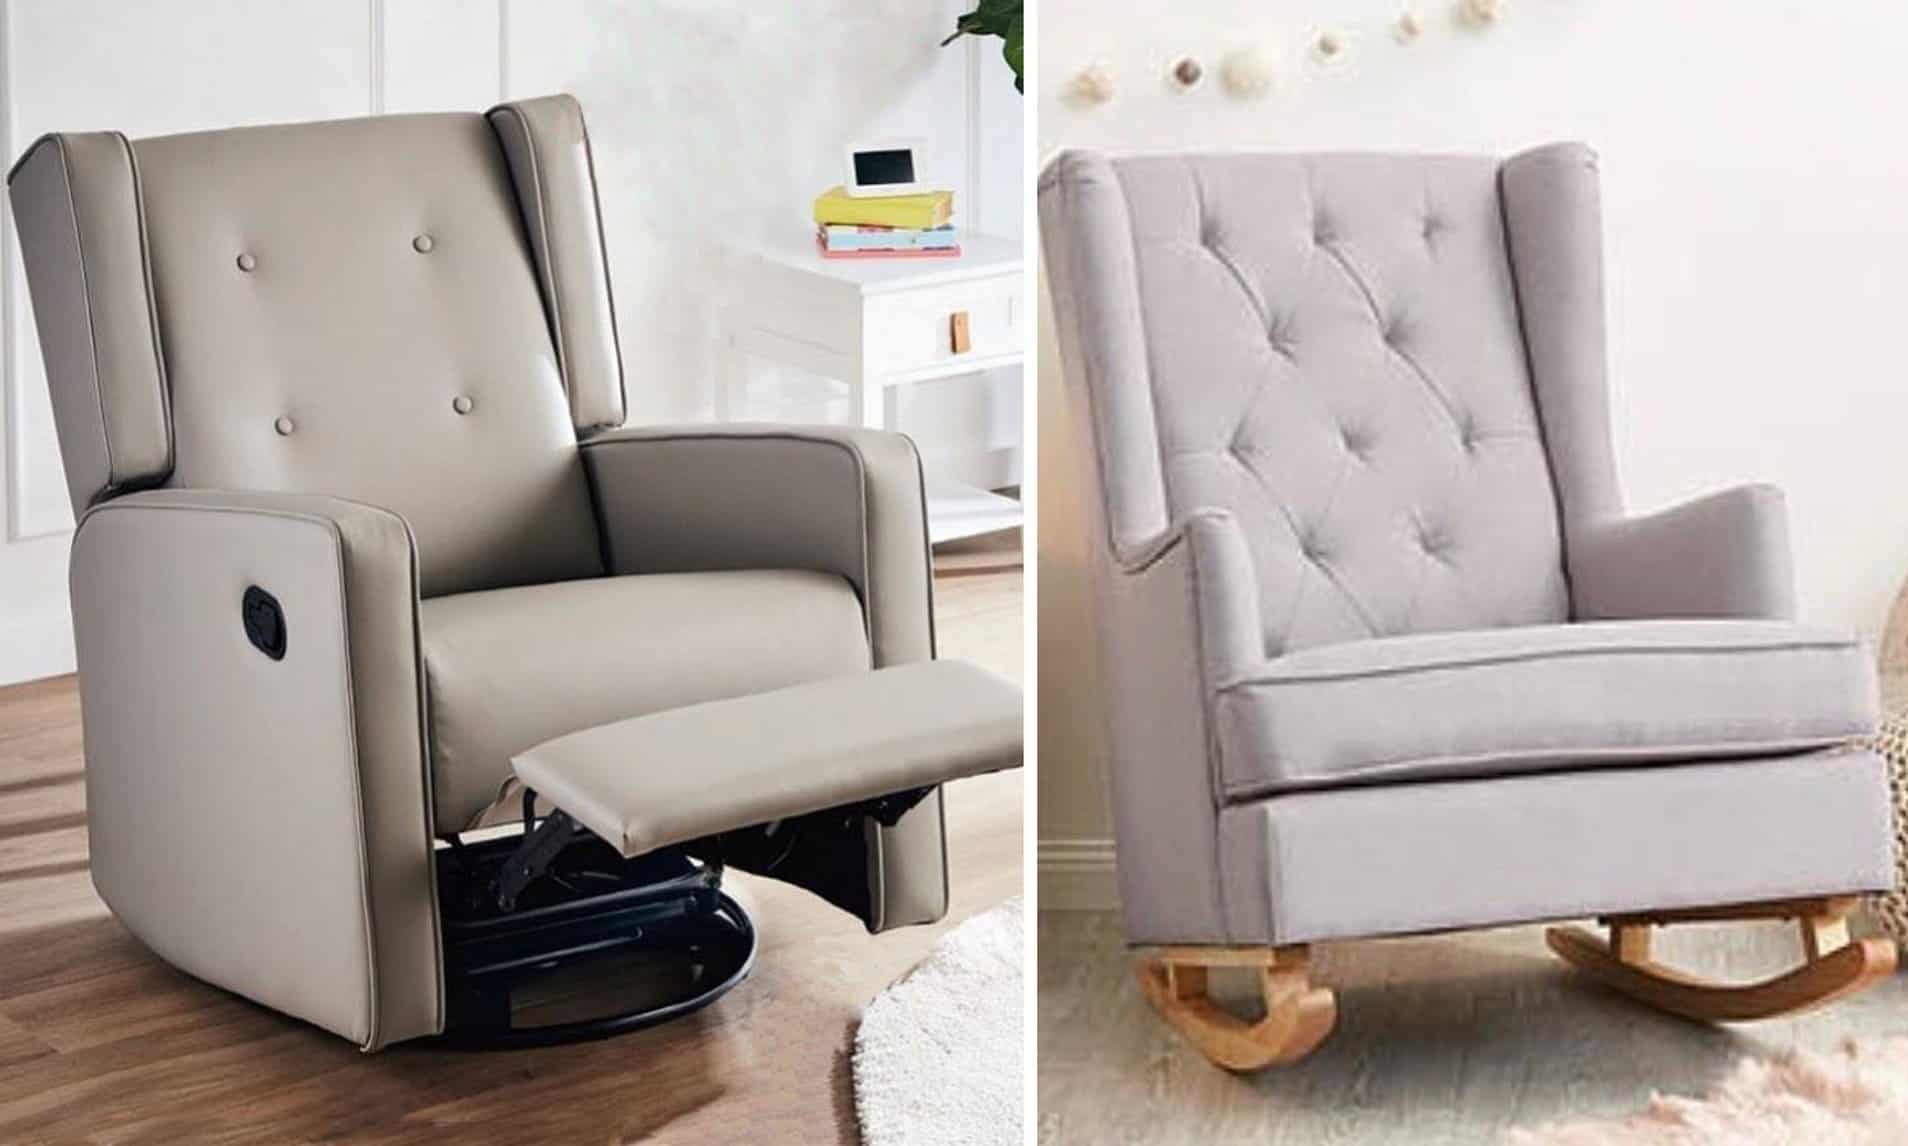 Difference Between A Glider and Rocker Recliner